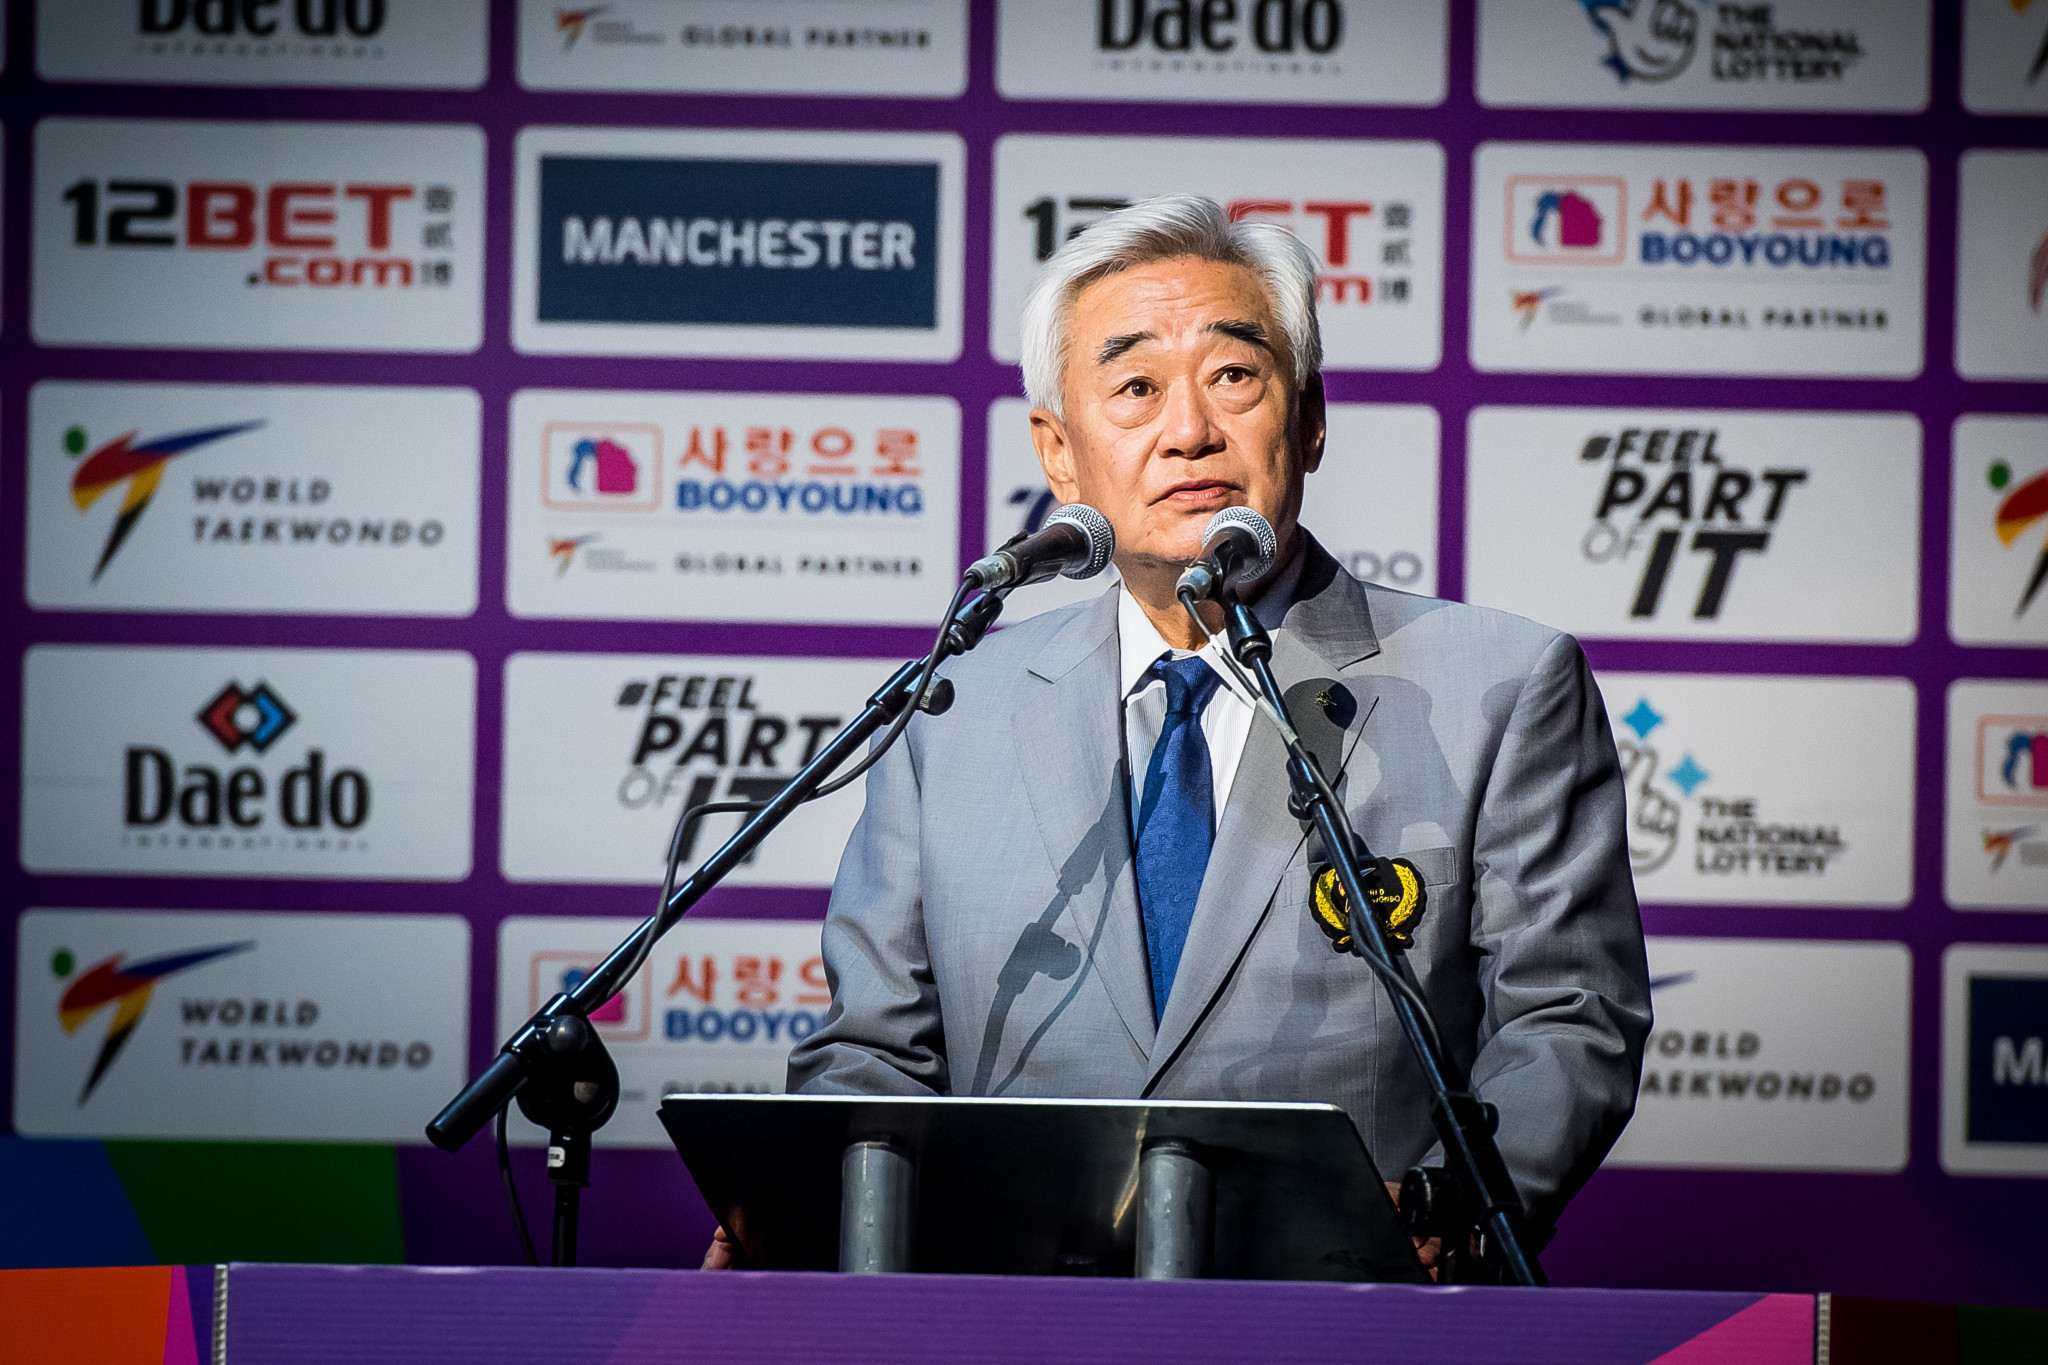 World Taekwondo President says World Championships can smooth out "malfunctions" for Tokyo 2020